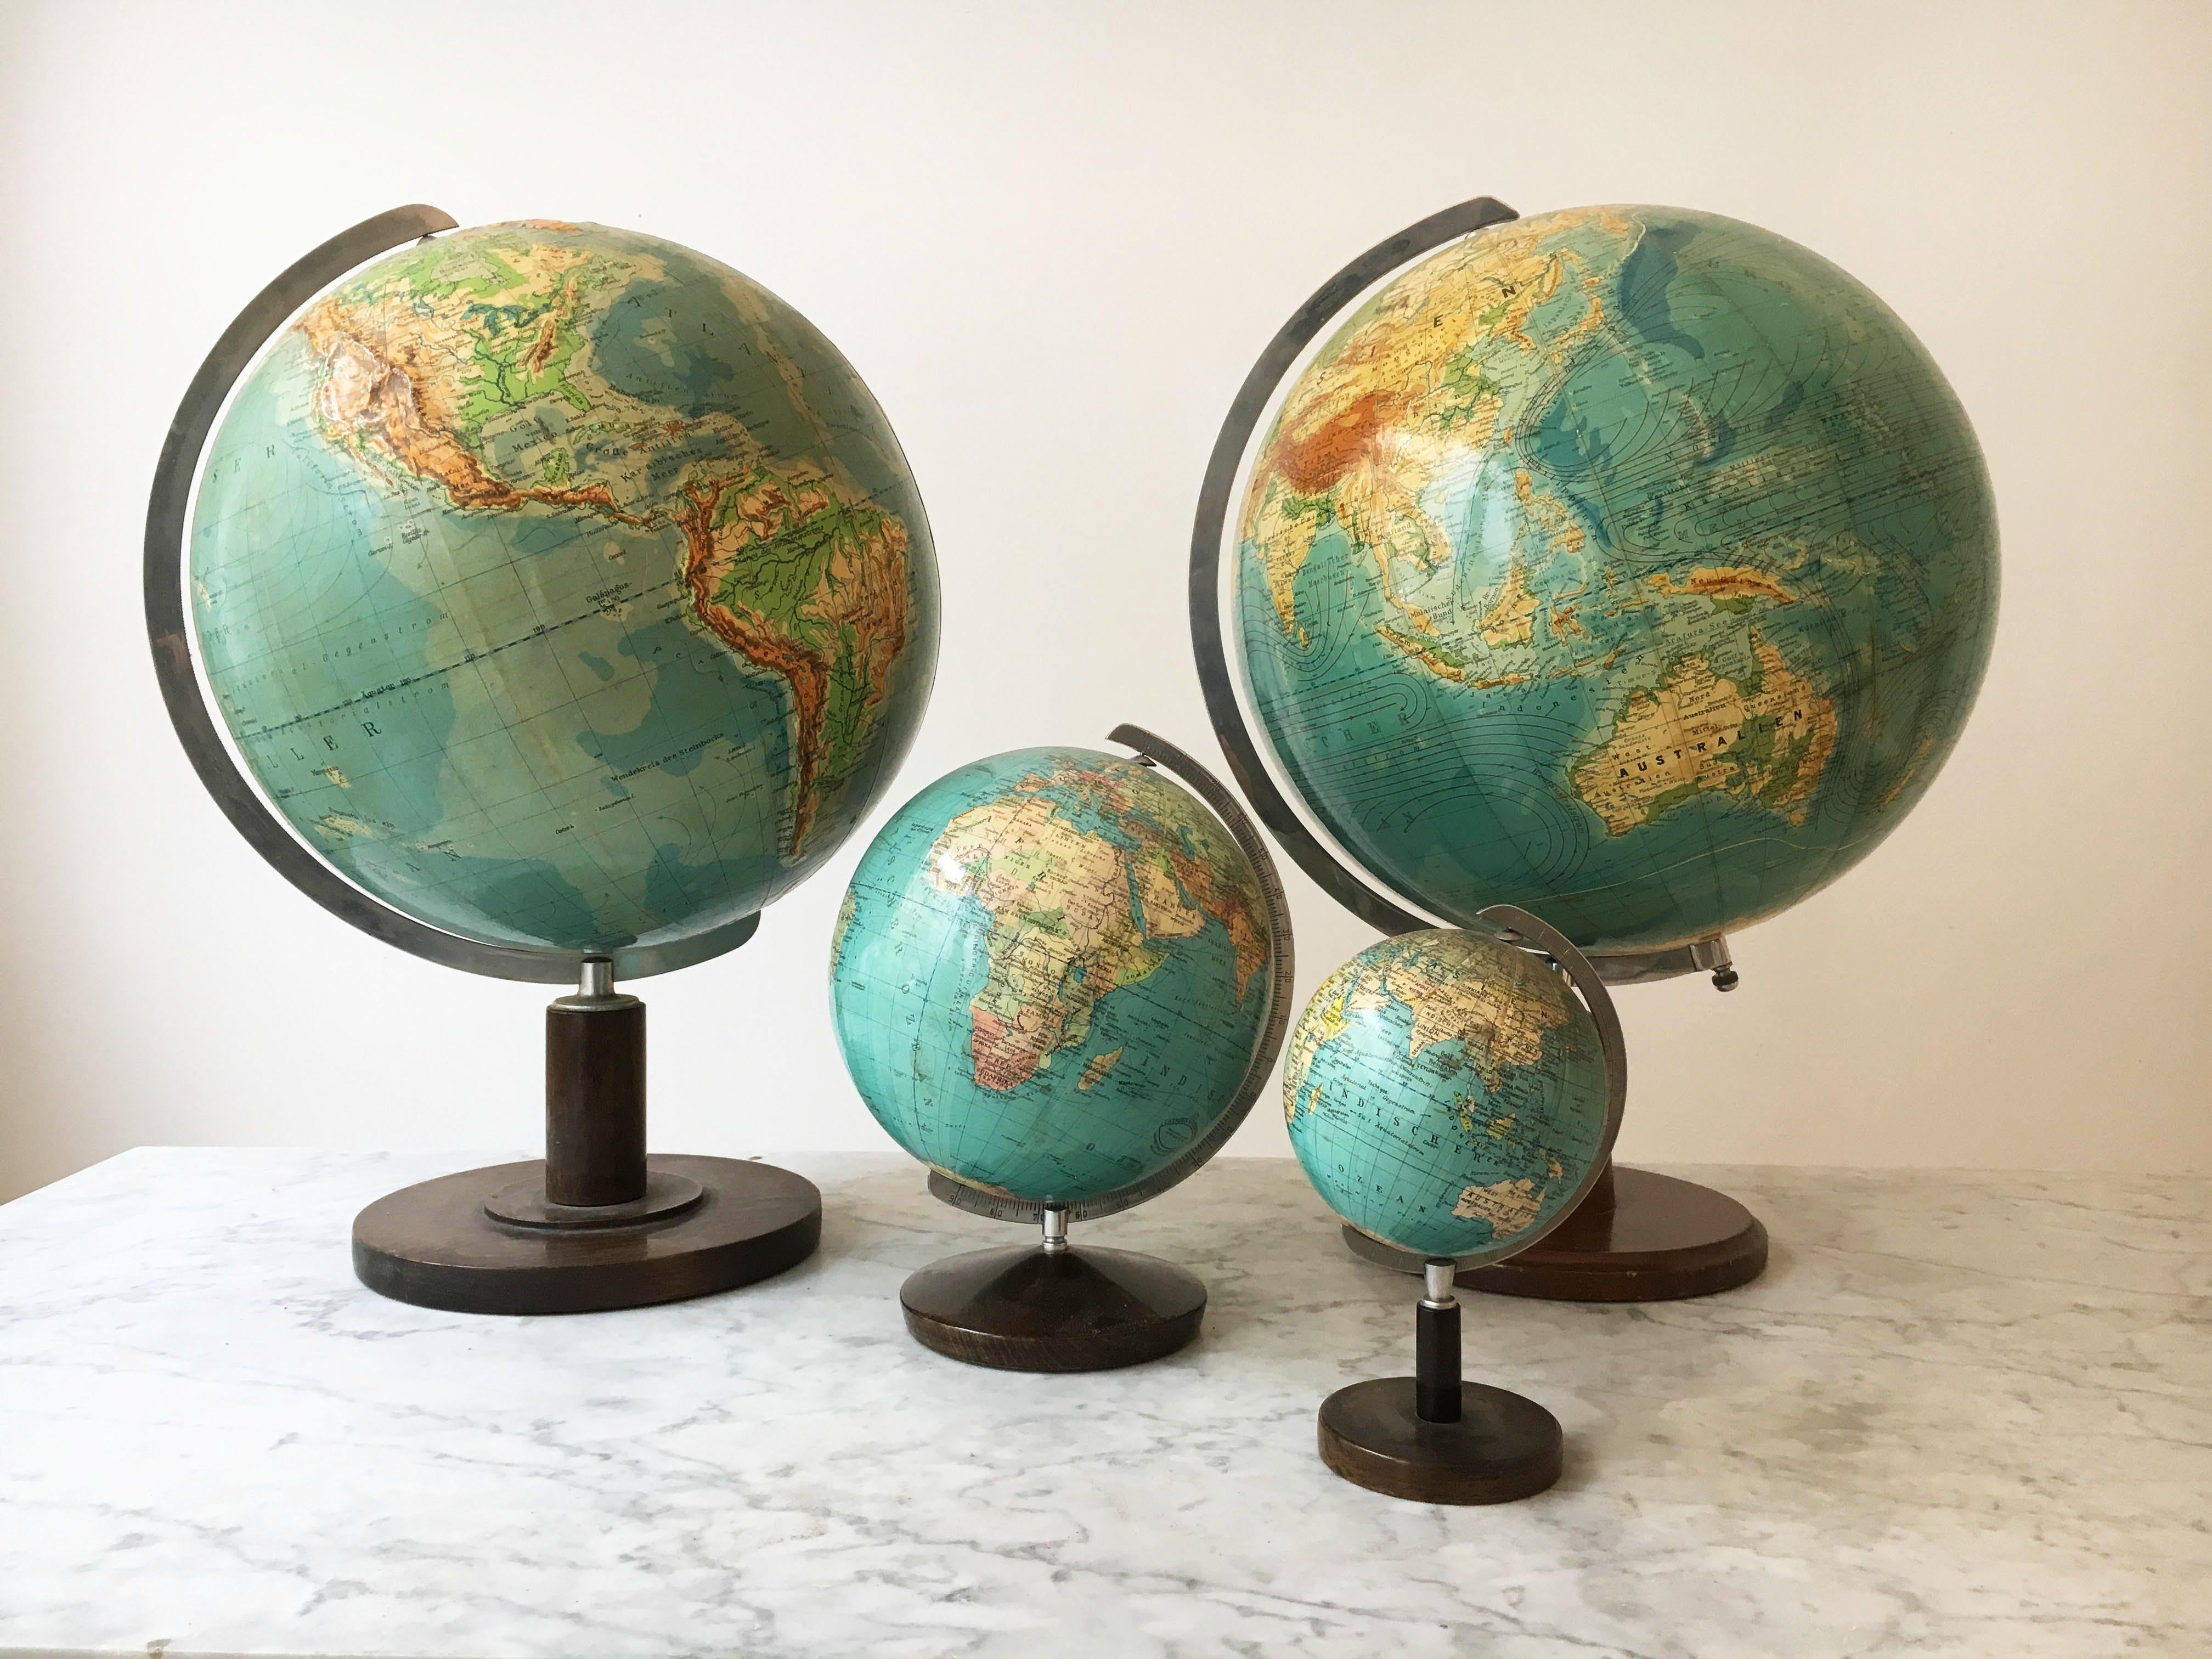 Vintage Globes collection of four, collected over many years of traveling in Europe, with an eye for beautifully curated objects. Paul Oestergaard globe manufactured by Columbus Verlag in Germany, Stuttgart/Berlin. In variations of size, from small